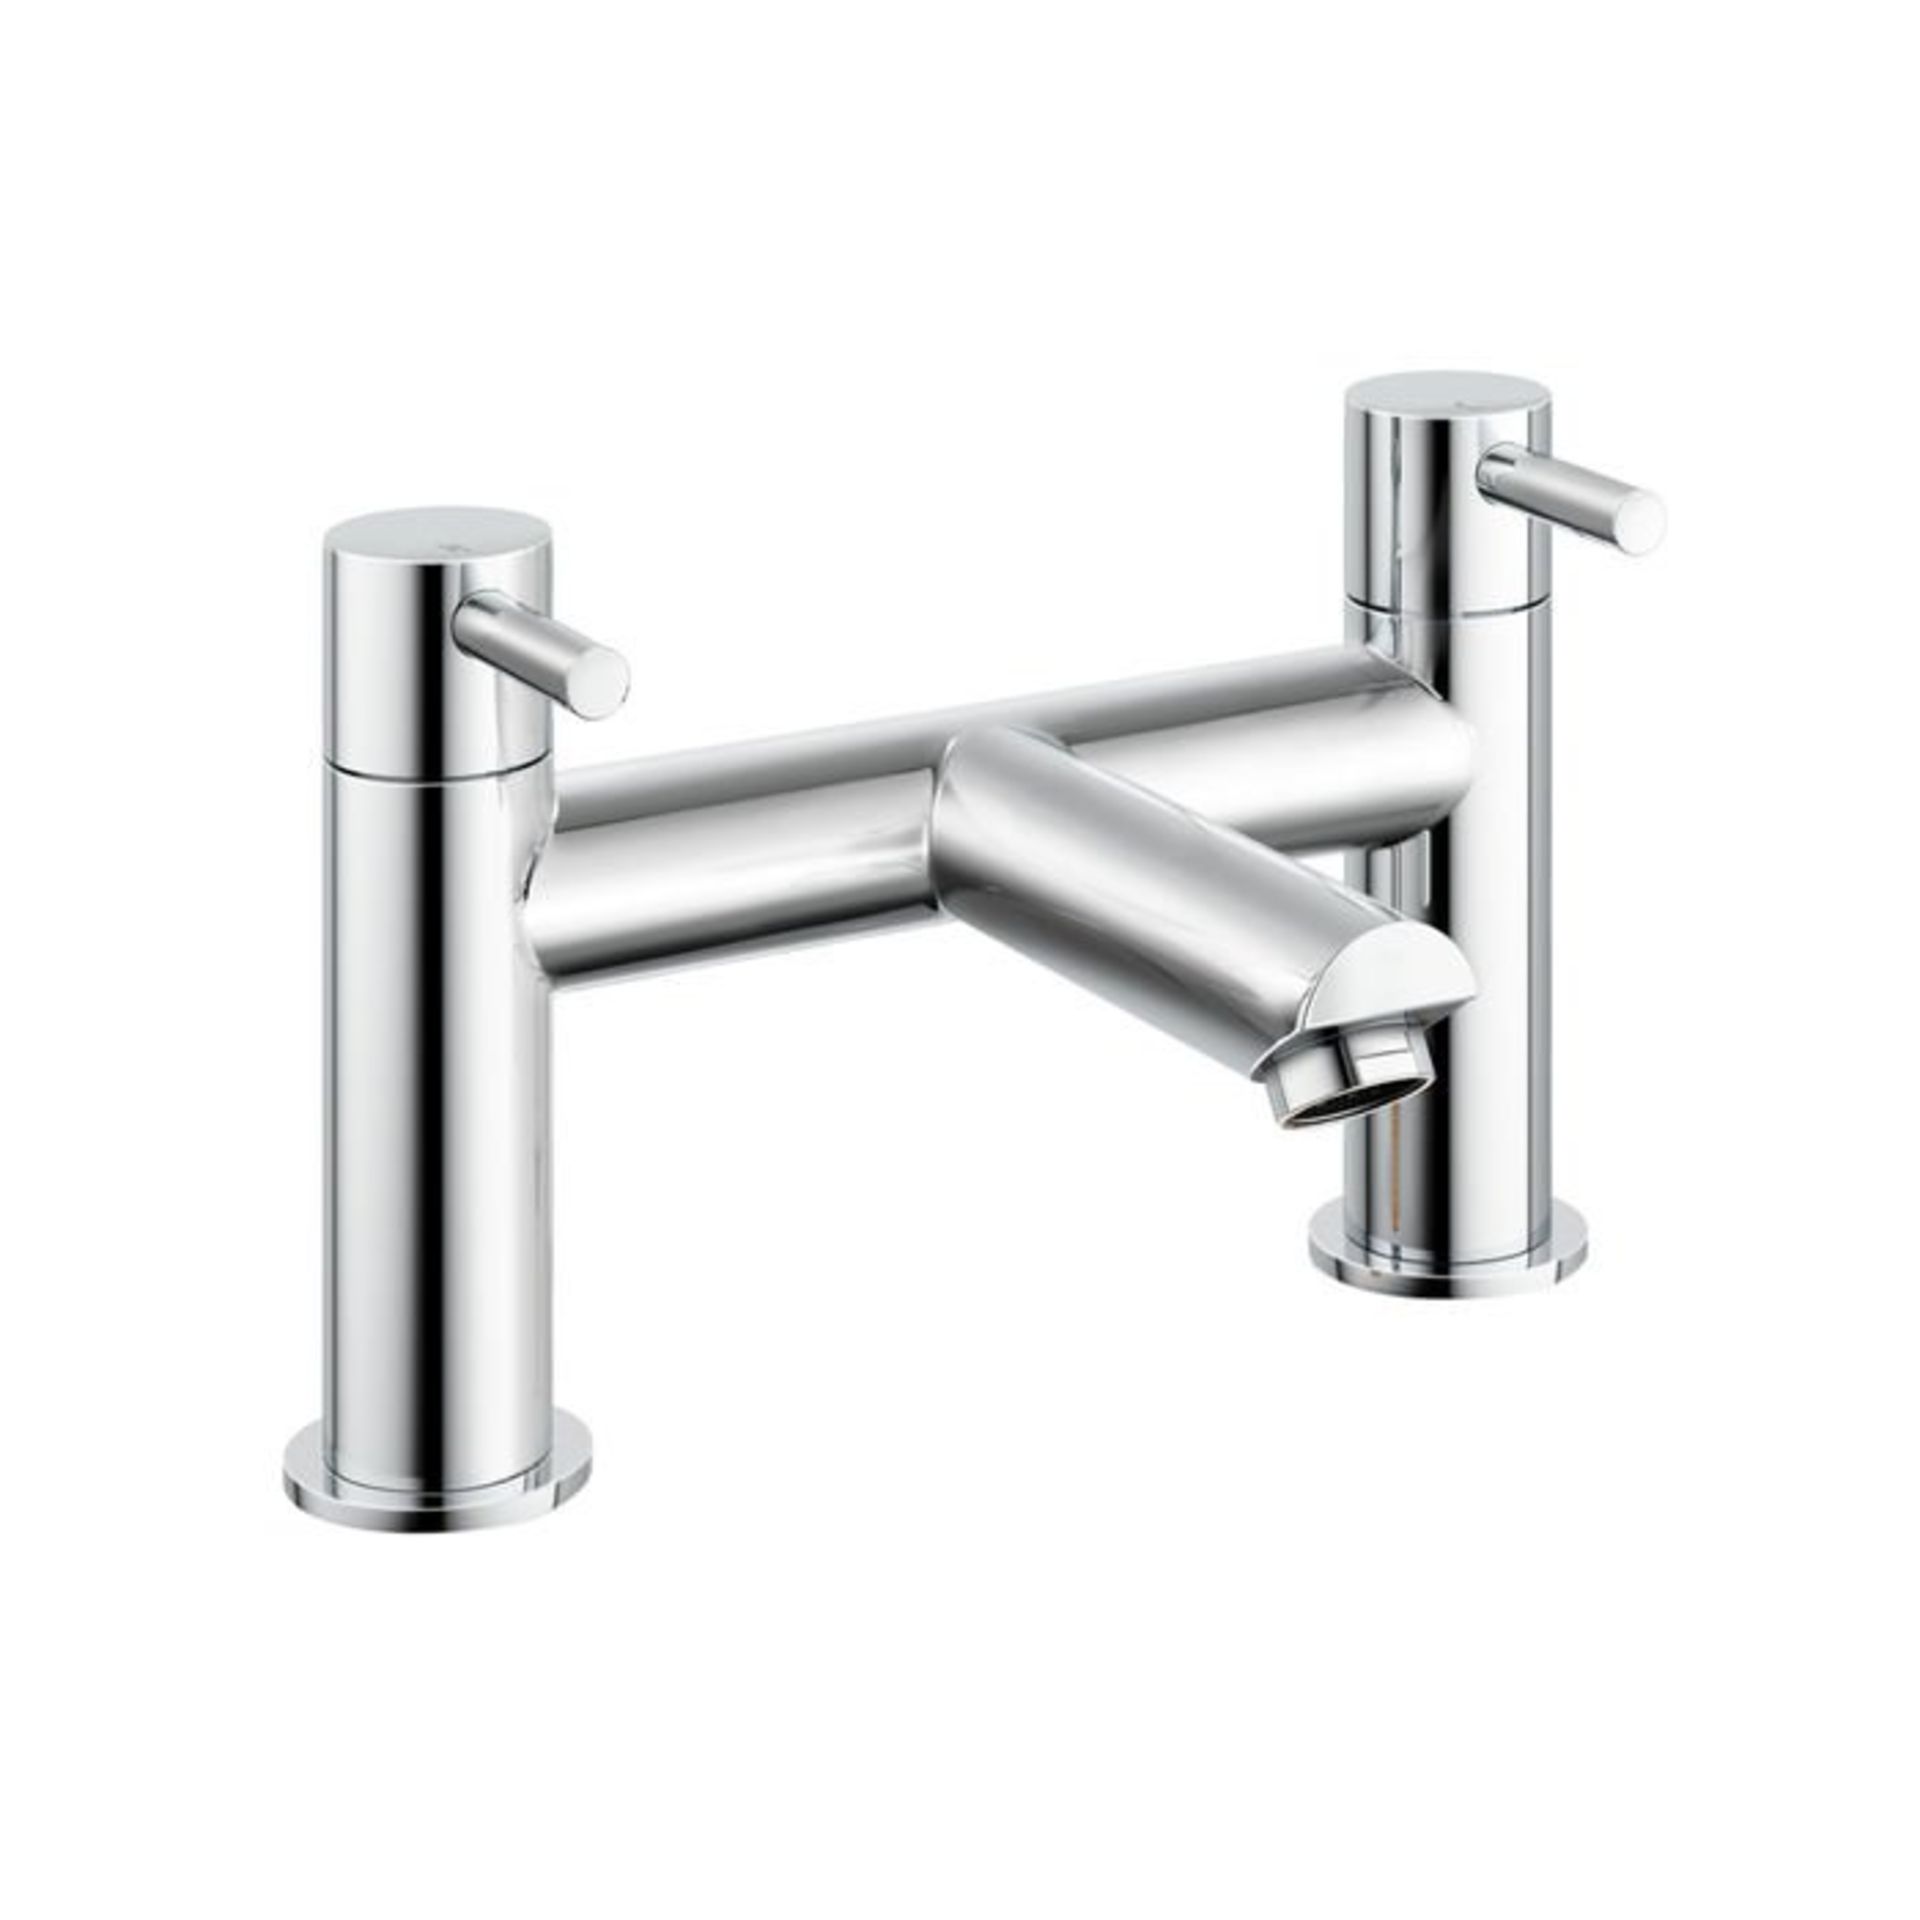 (S87) Gladstone II Bath Filler Mixer Tap Chrome Plated Solid Brass 1/4 turn solid brass valve with - Image 2 of 2